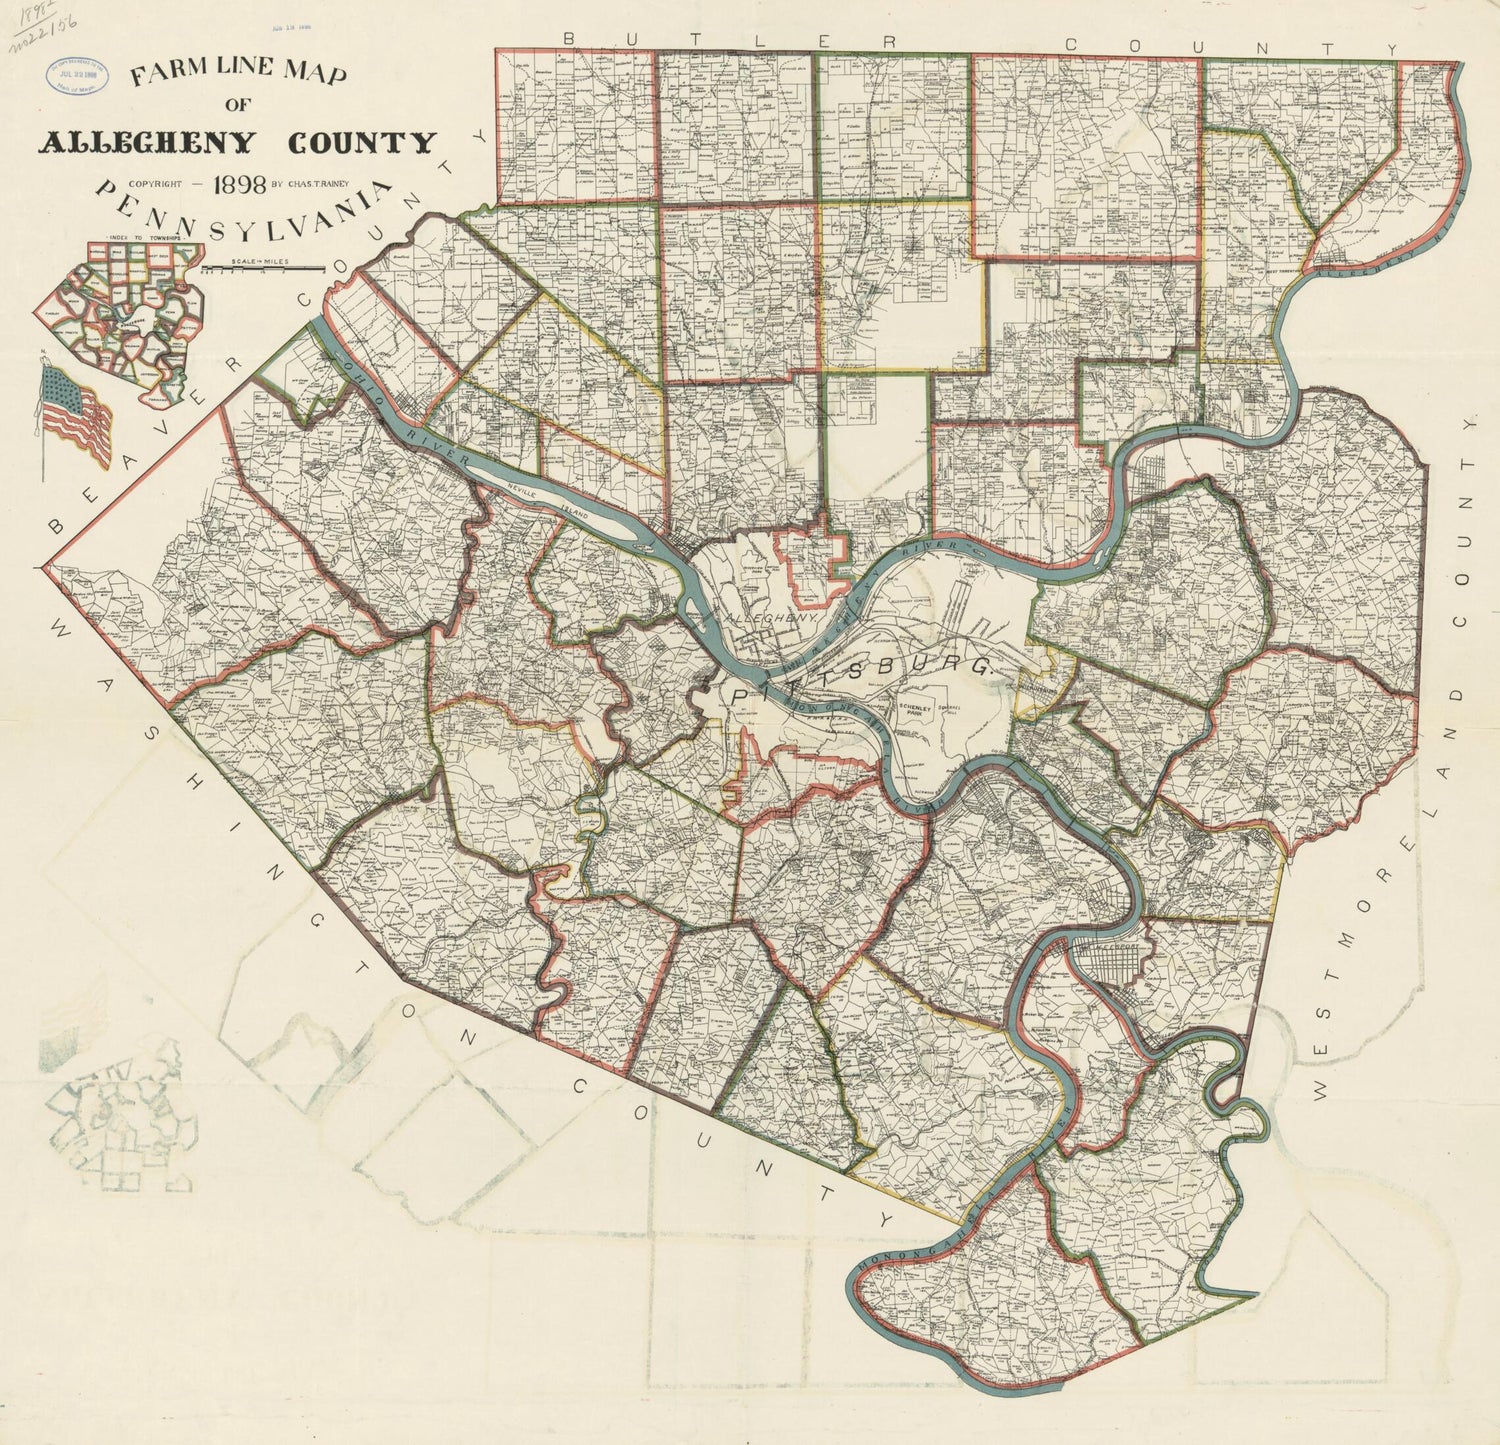 This old map of Farm Line Map of Allegheny County, Pennsylvania from 1898 was created by Chas. T. (Charles T.) Rainey in 1898